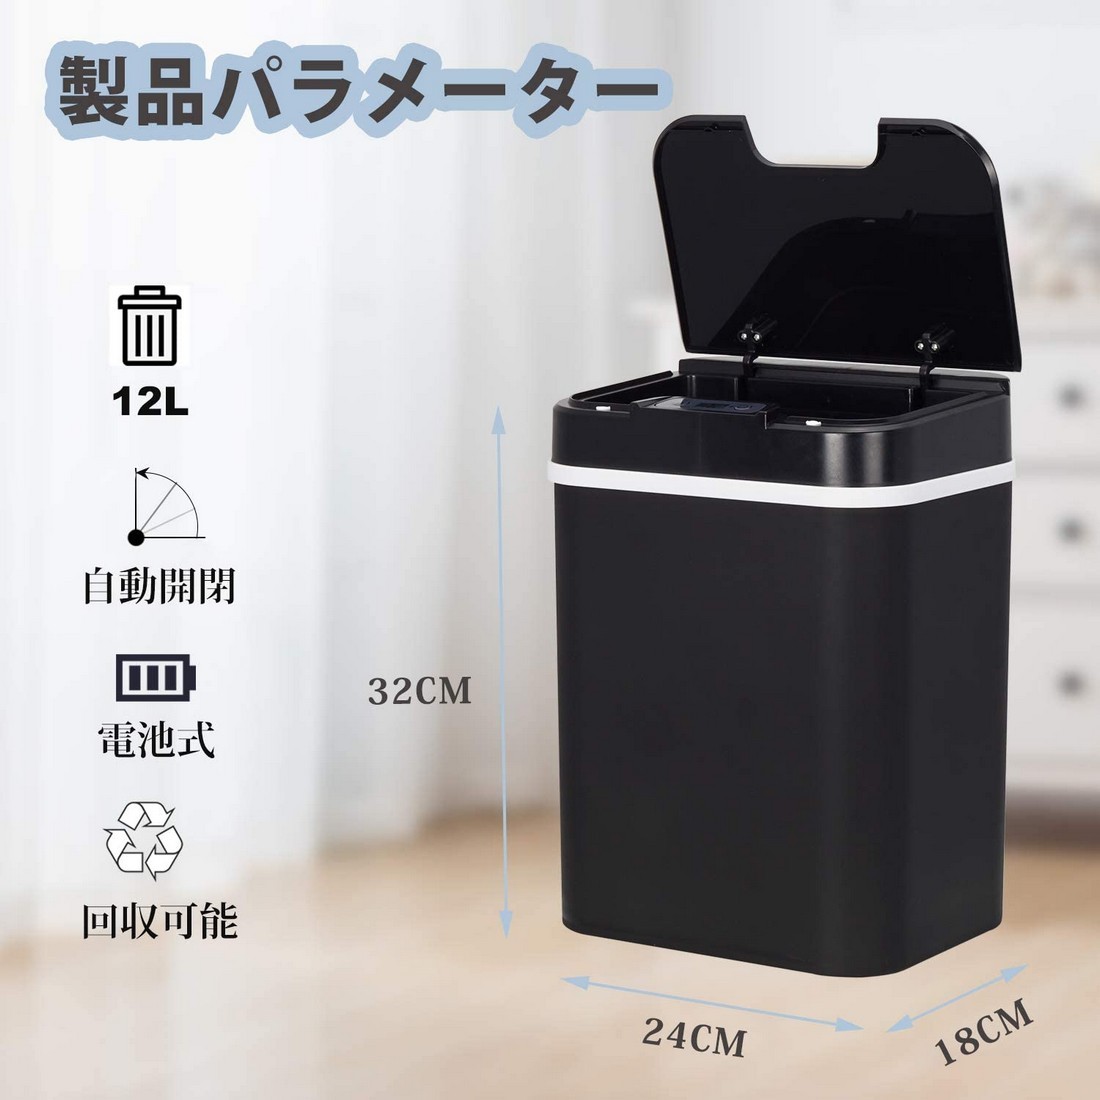  Smart waste basket sensor attaching full automation opening and closing 12L cover attaching trash can contactless Smart induction waste basket stylish living room sl1165-bk